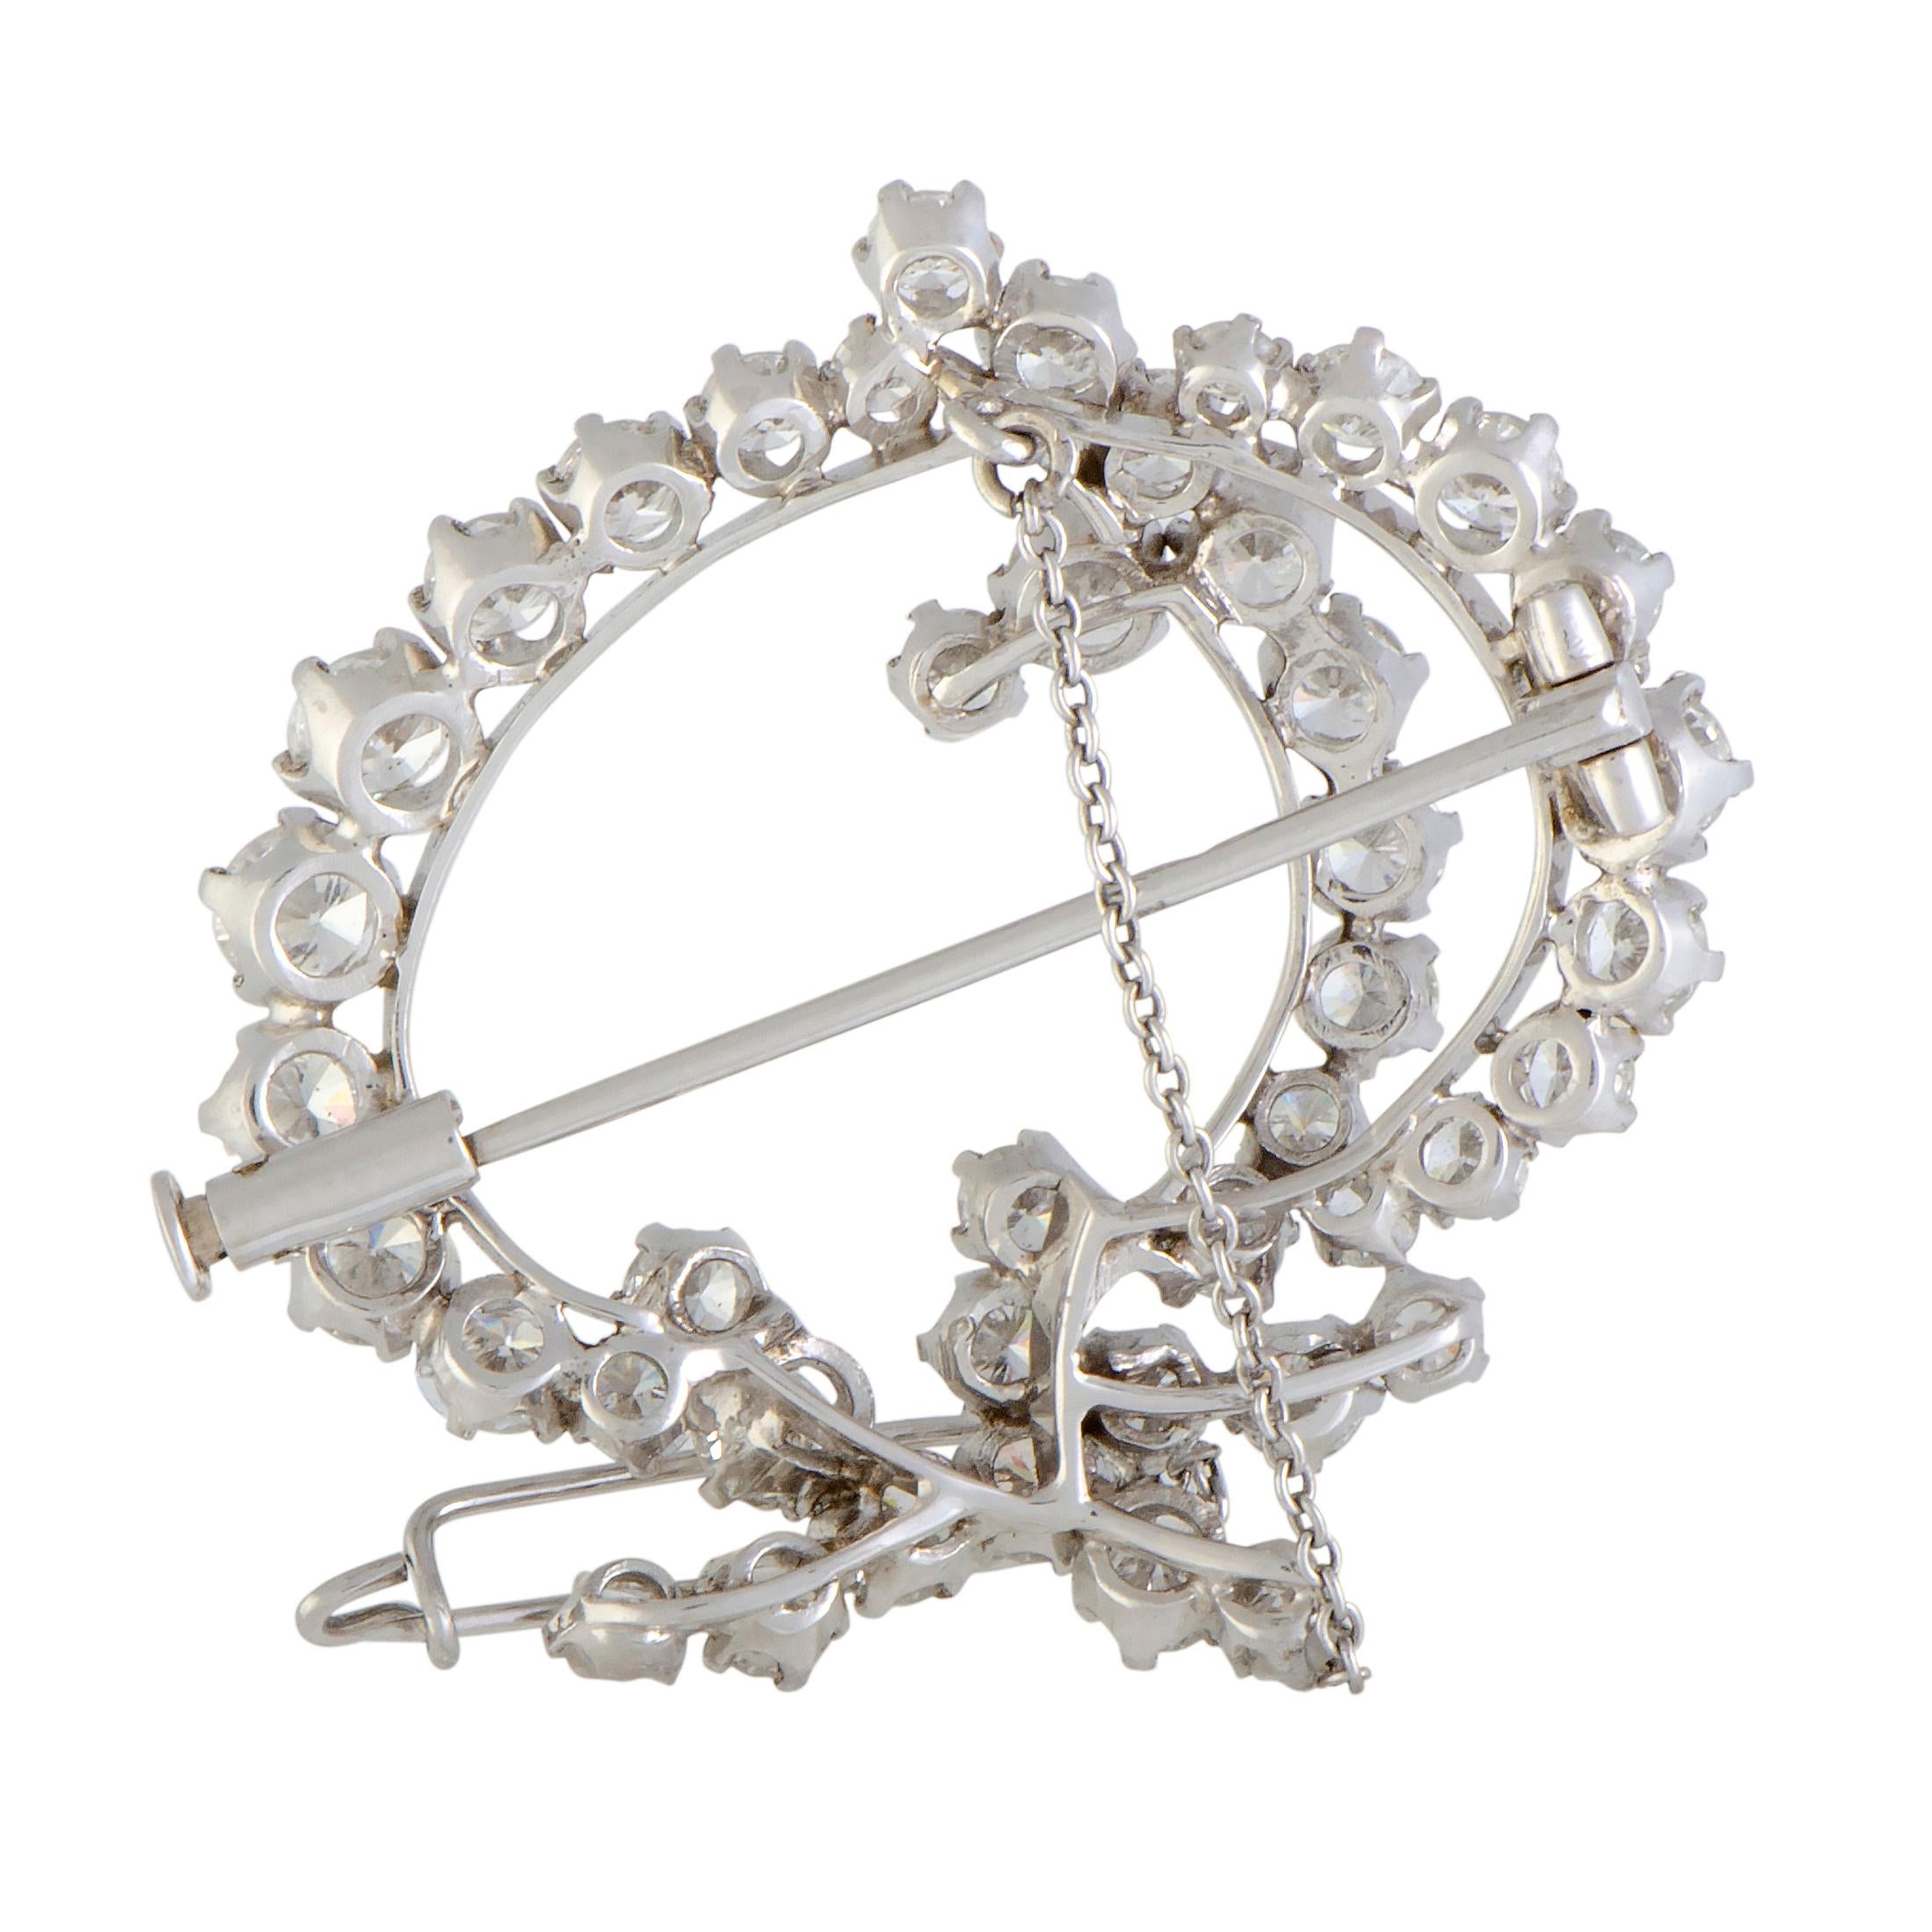 Accentuate your ensemble with a splendidly classy touch with this gorgeous brooch that is the embodiment of prestigious elegance and luxe refinement. Beautifully made of platinum, the brooch is decorated with expertly cut nearly colorless (grade G)